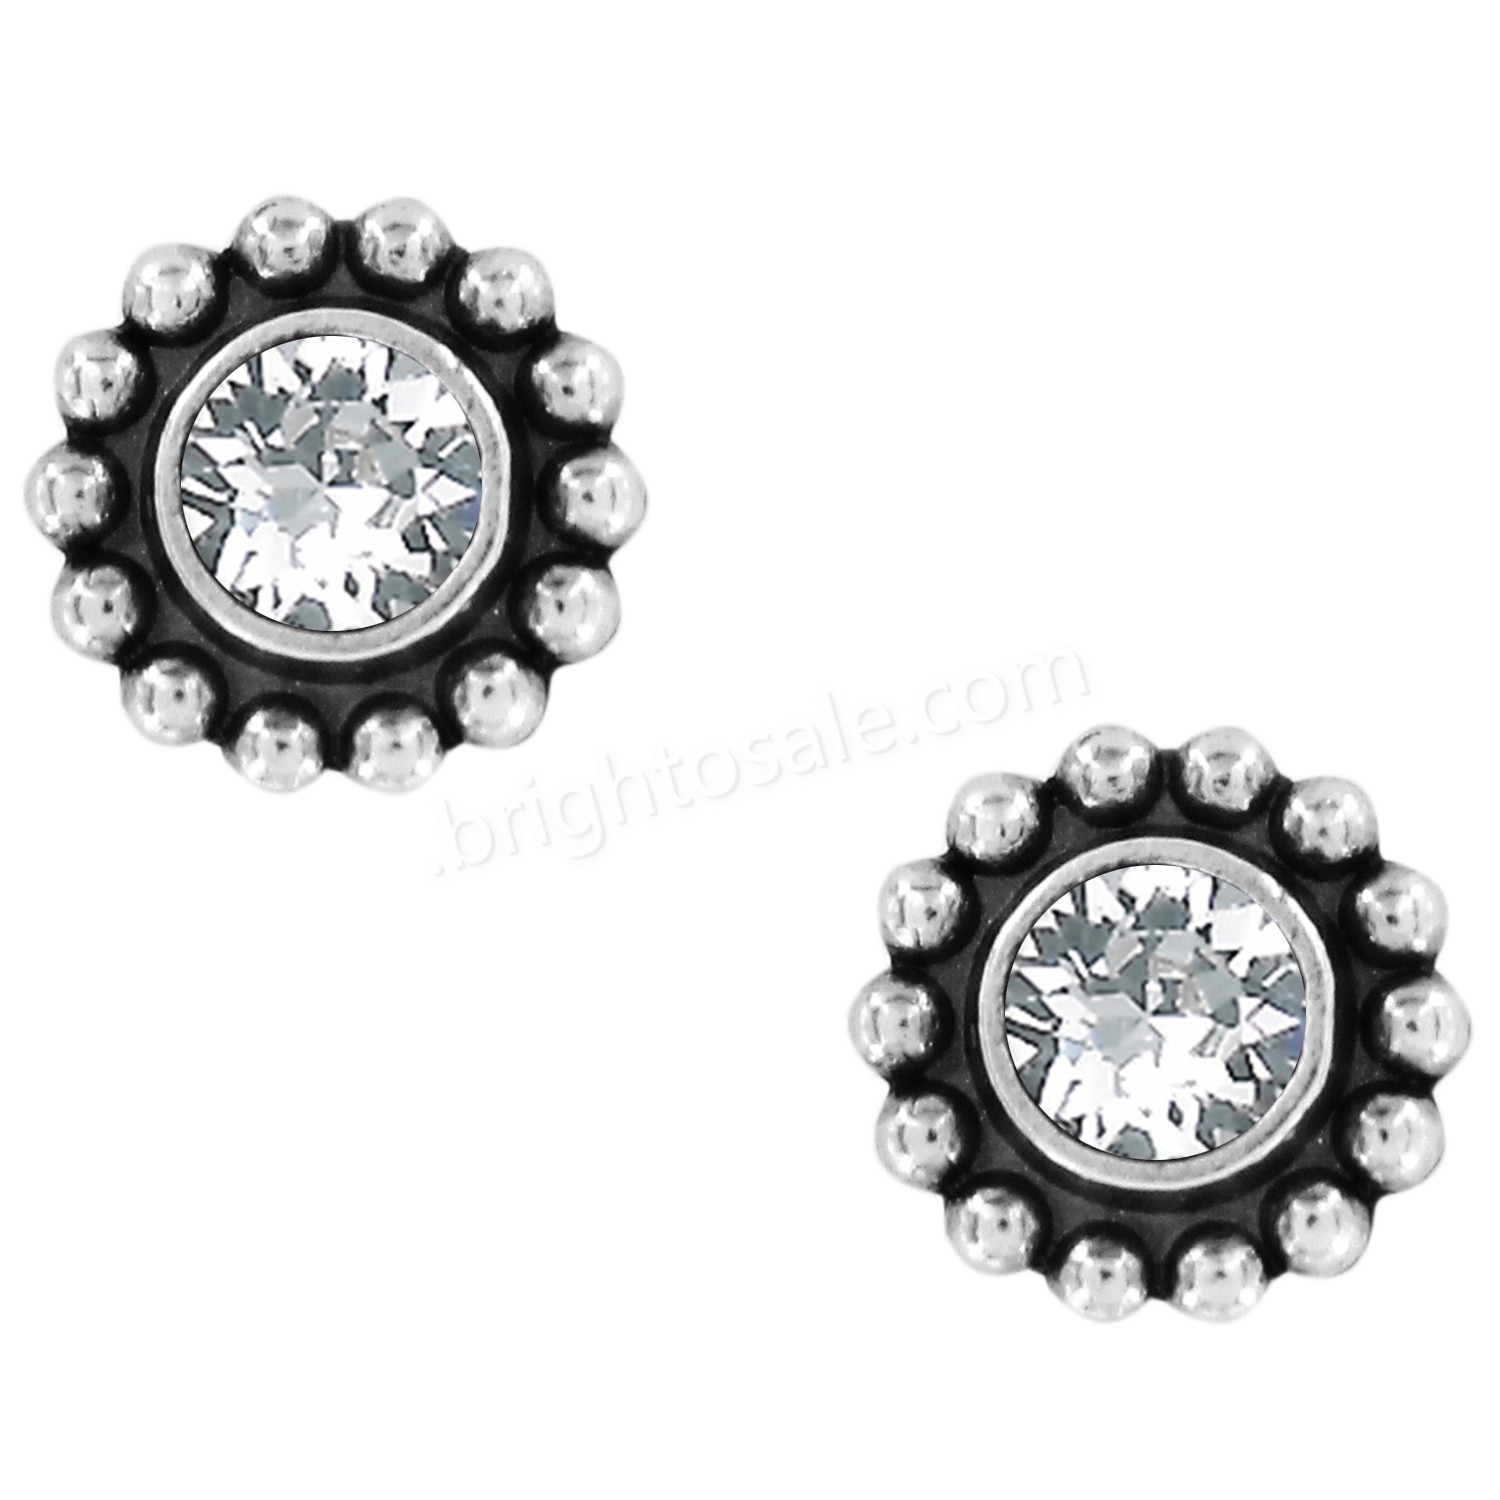 Brighton Collectibles & Online Discount Twinkle Mini Post Earrings - Brighton Collectibles & Online Discount Twinkle Mini Post Earrings